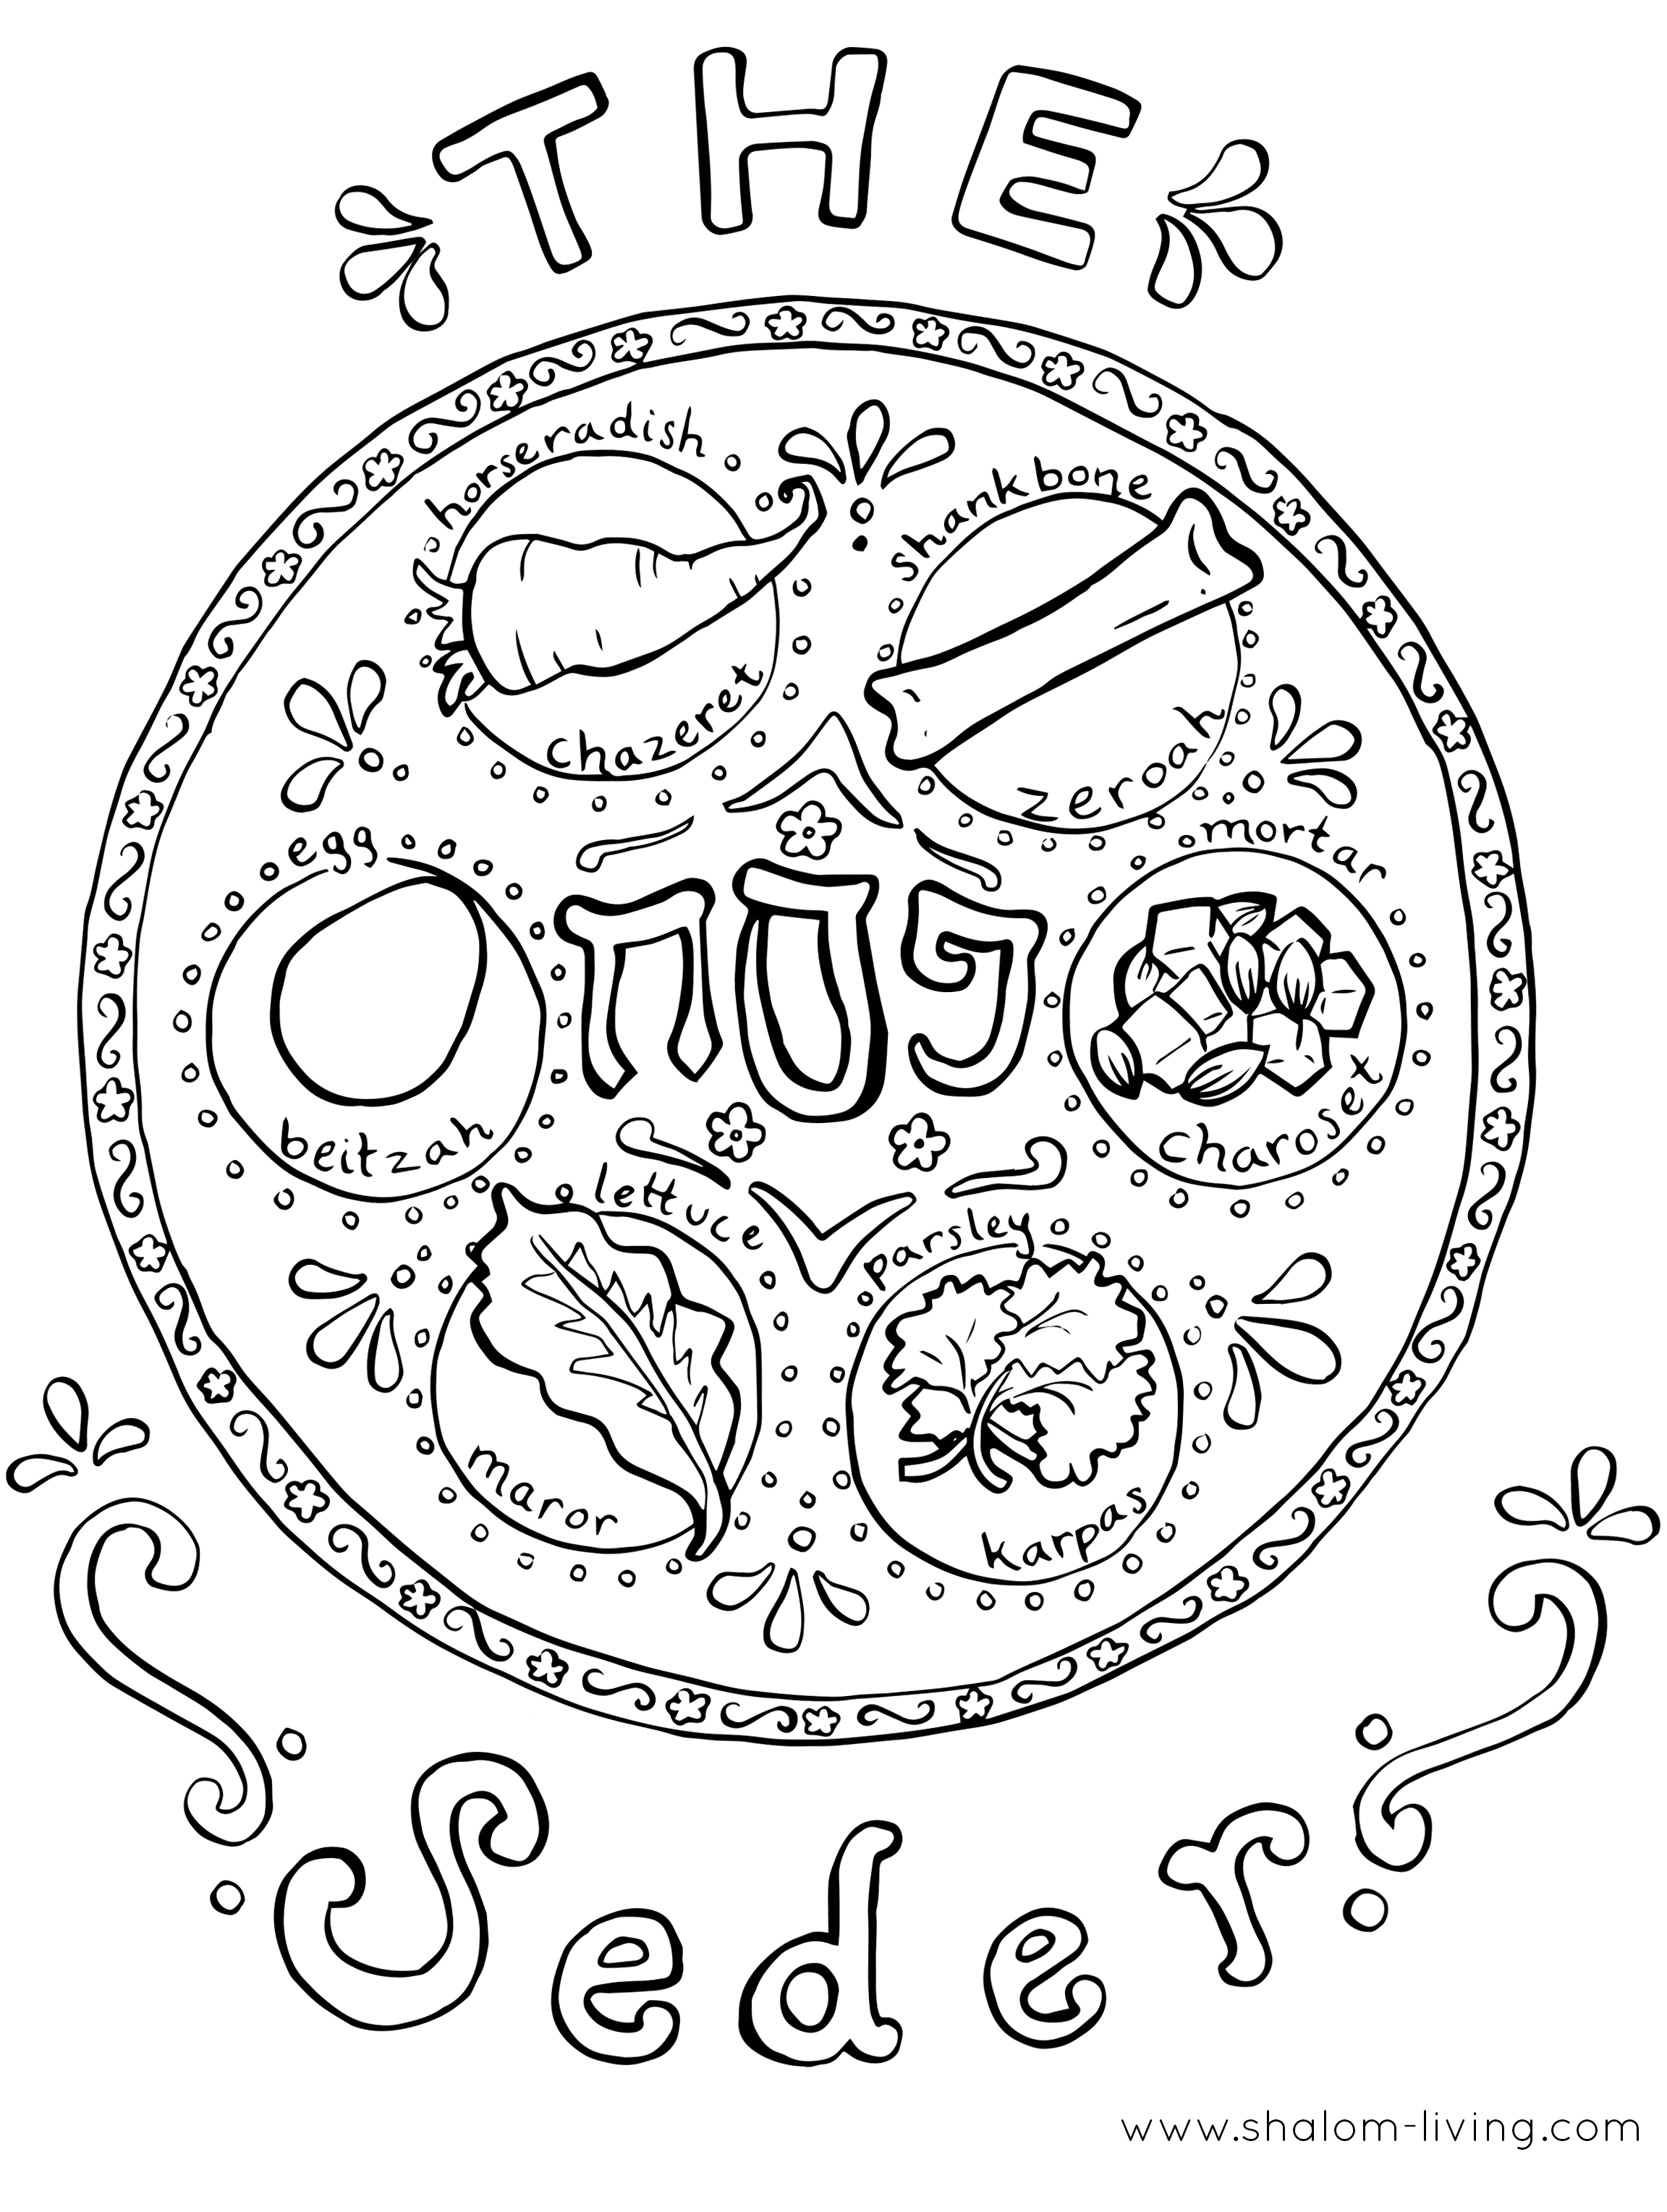 The Seder Coloring Page